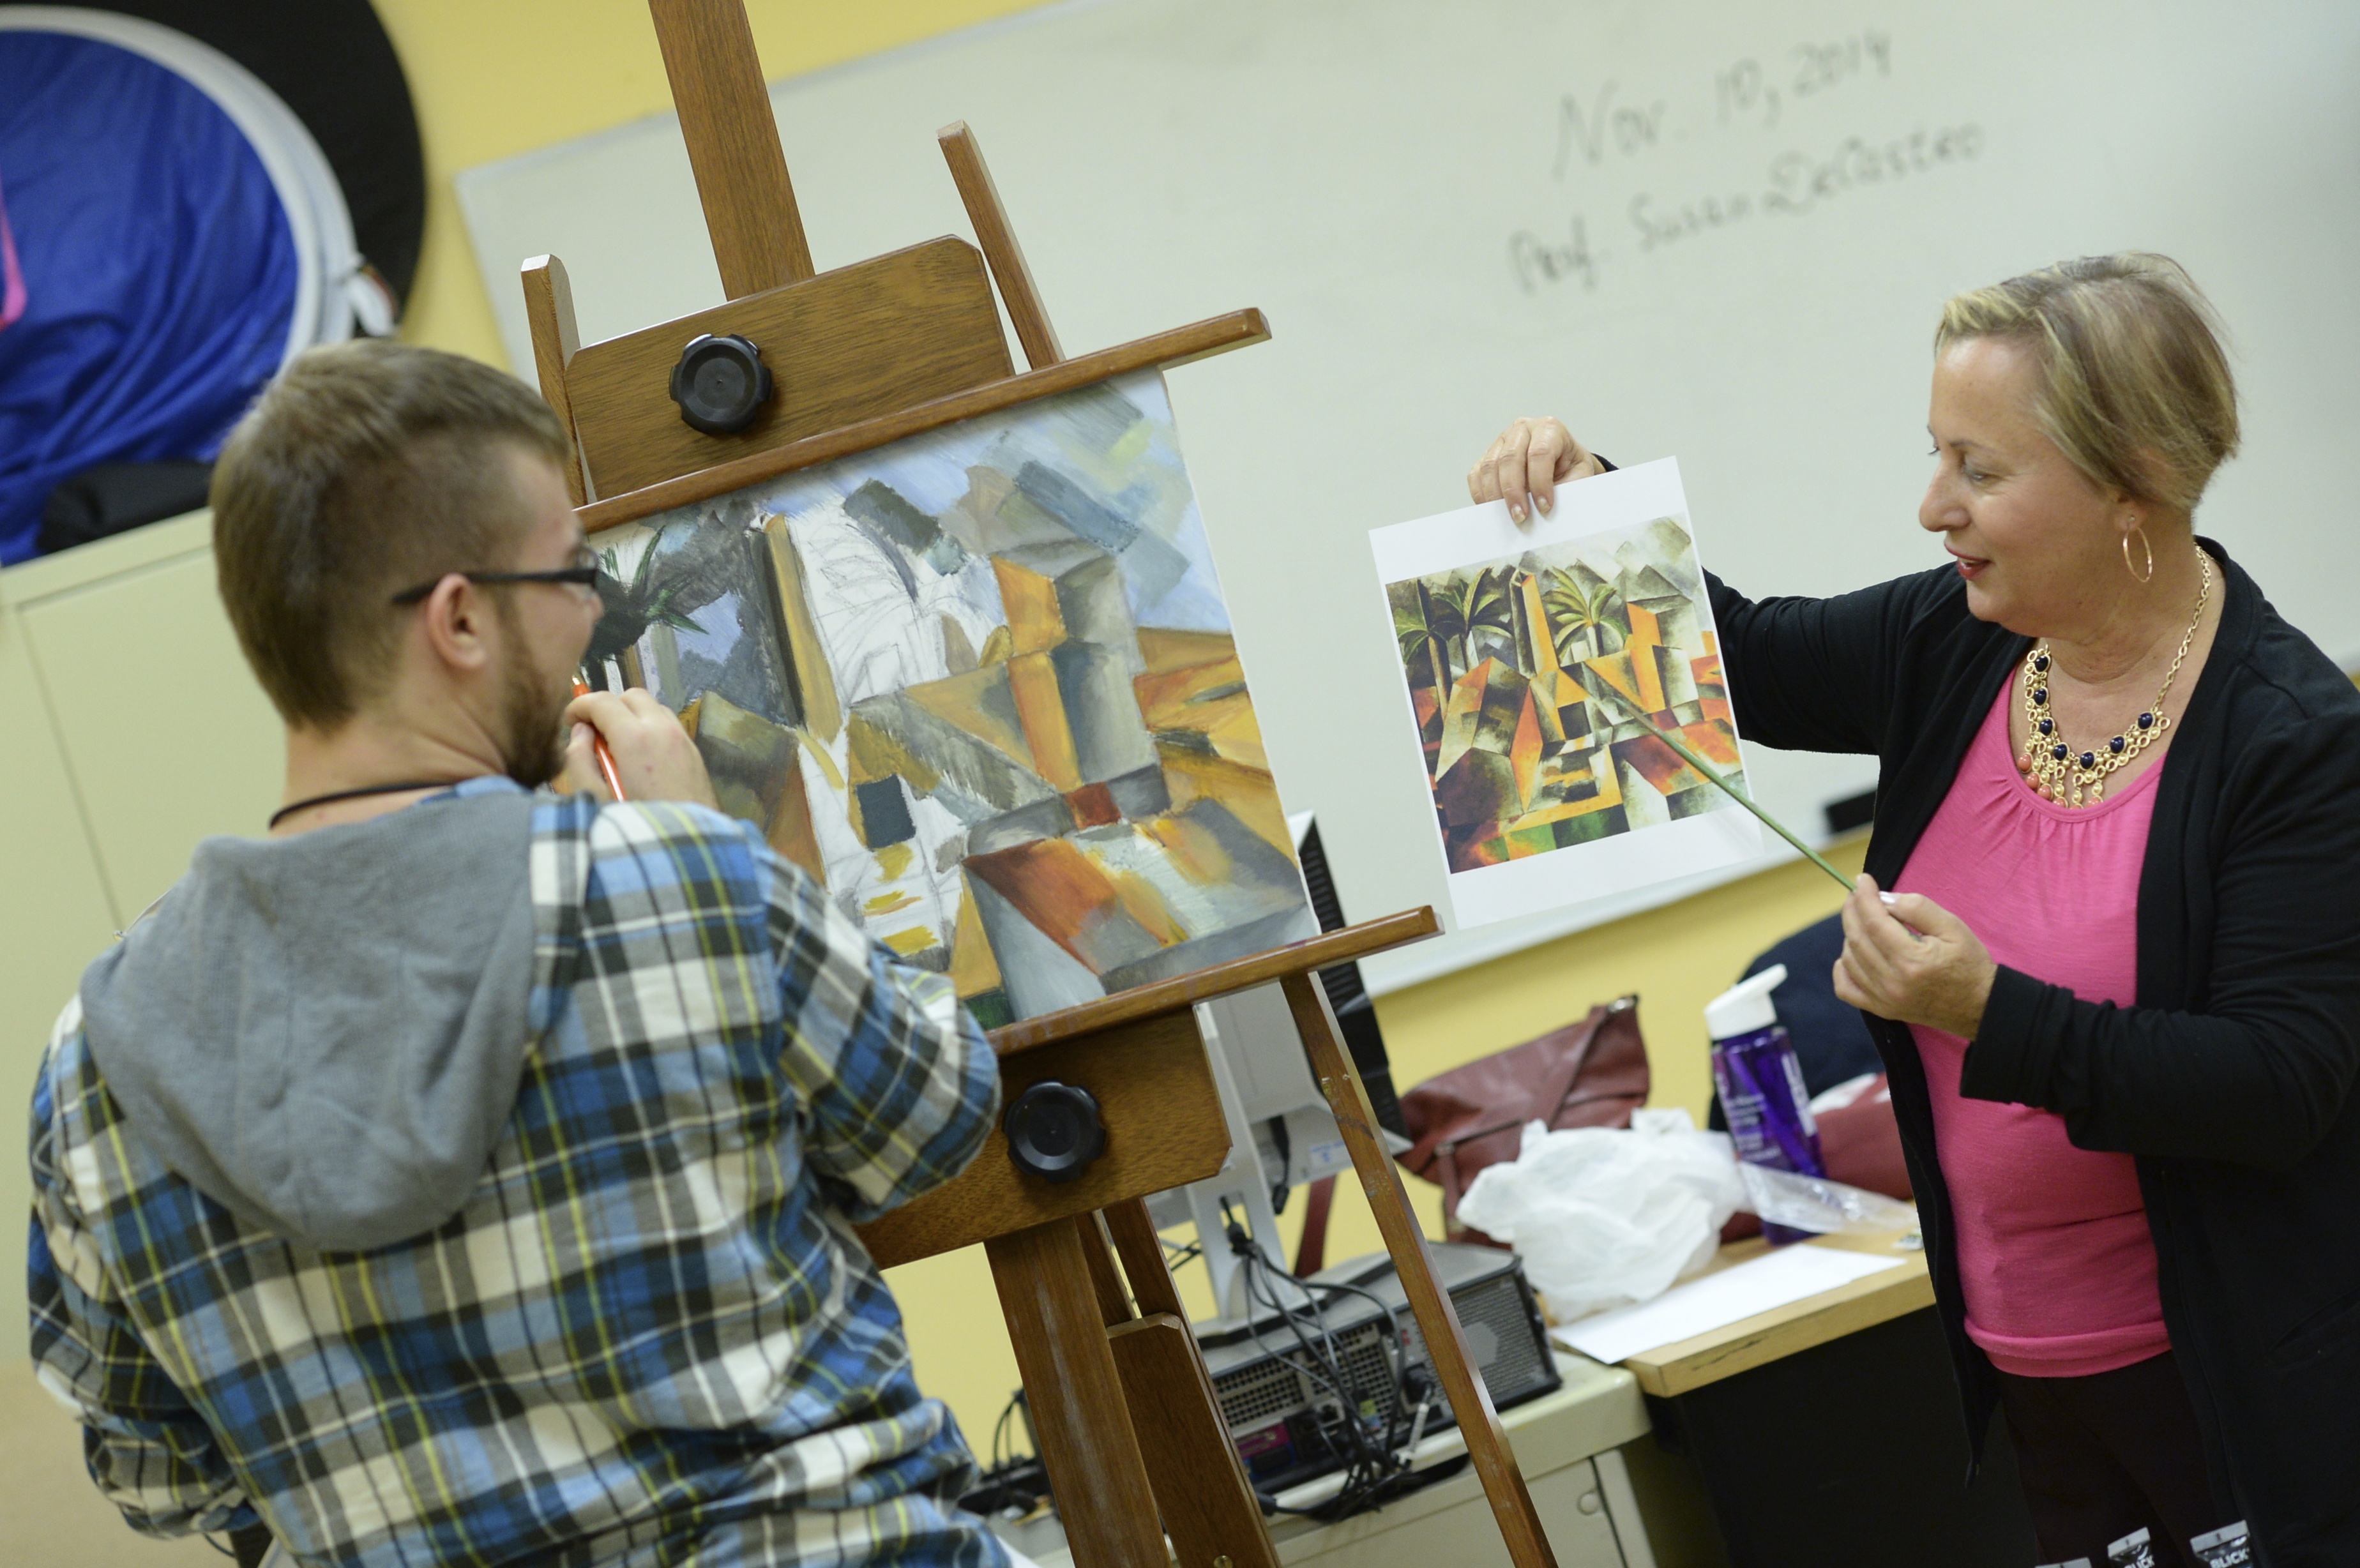 Professor Susan De Castro, holding up a print of a Picasso cubist painting, helps one of her students during class. The student is standing in front of an easel, working on his own cubist painting. 